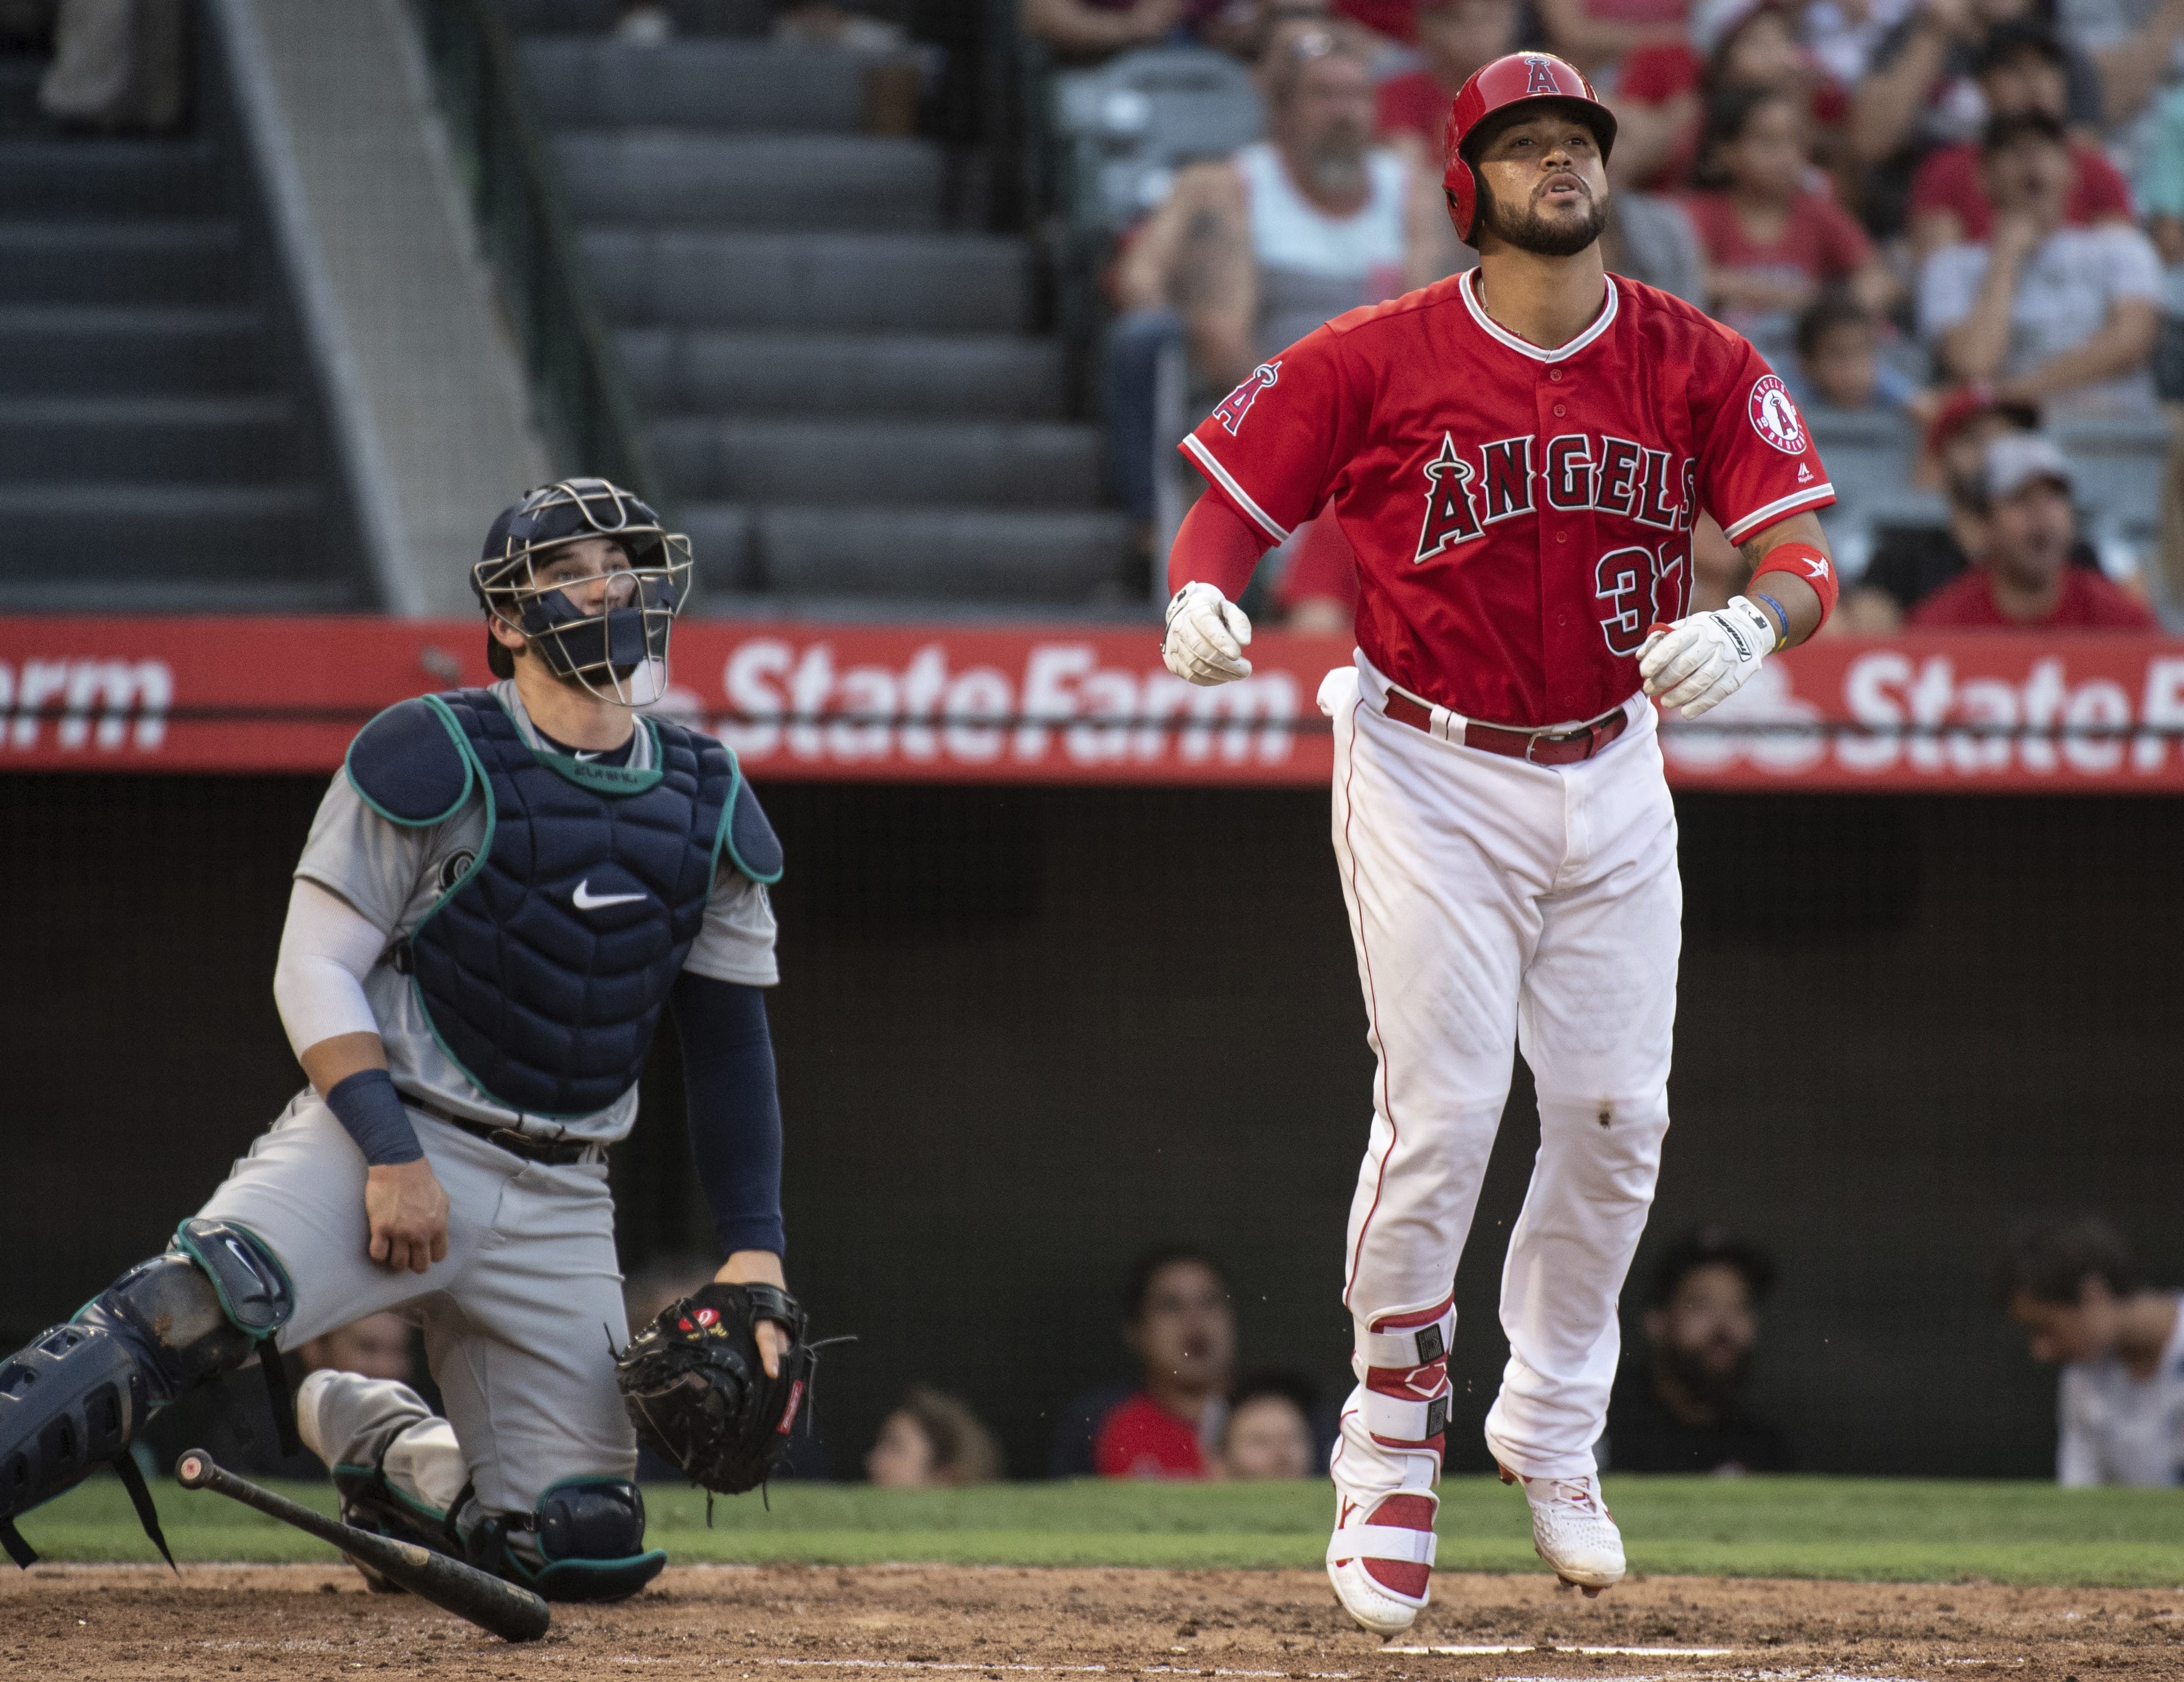 Los Angeles Angels' Francisco Arcia, right, watches his three-run home run next to Seattle Mariners catcher Mike Zunino during the third inning of baseball game in Anaheim, Calif., Saturday, July 28, 2018.